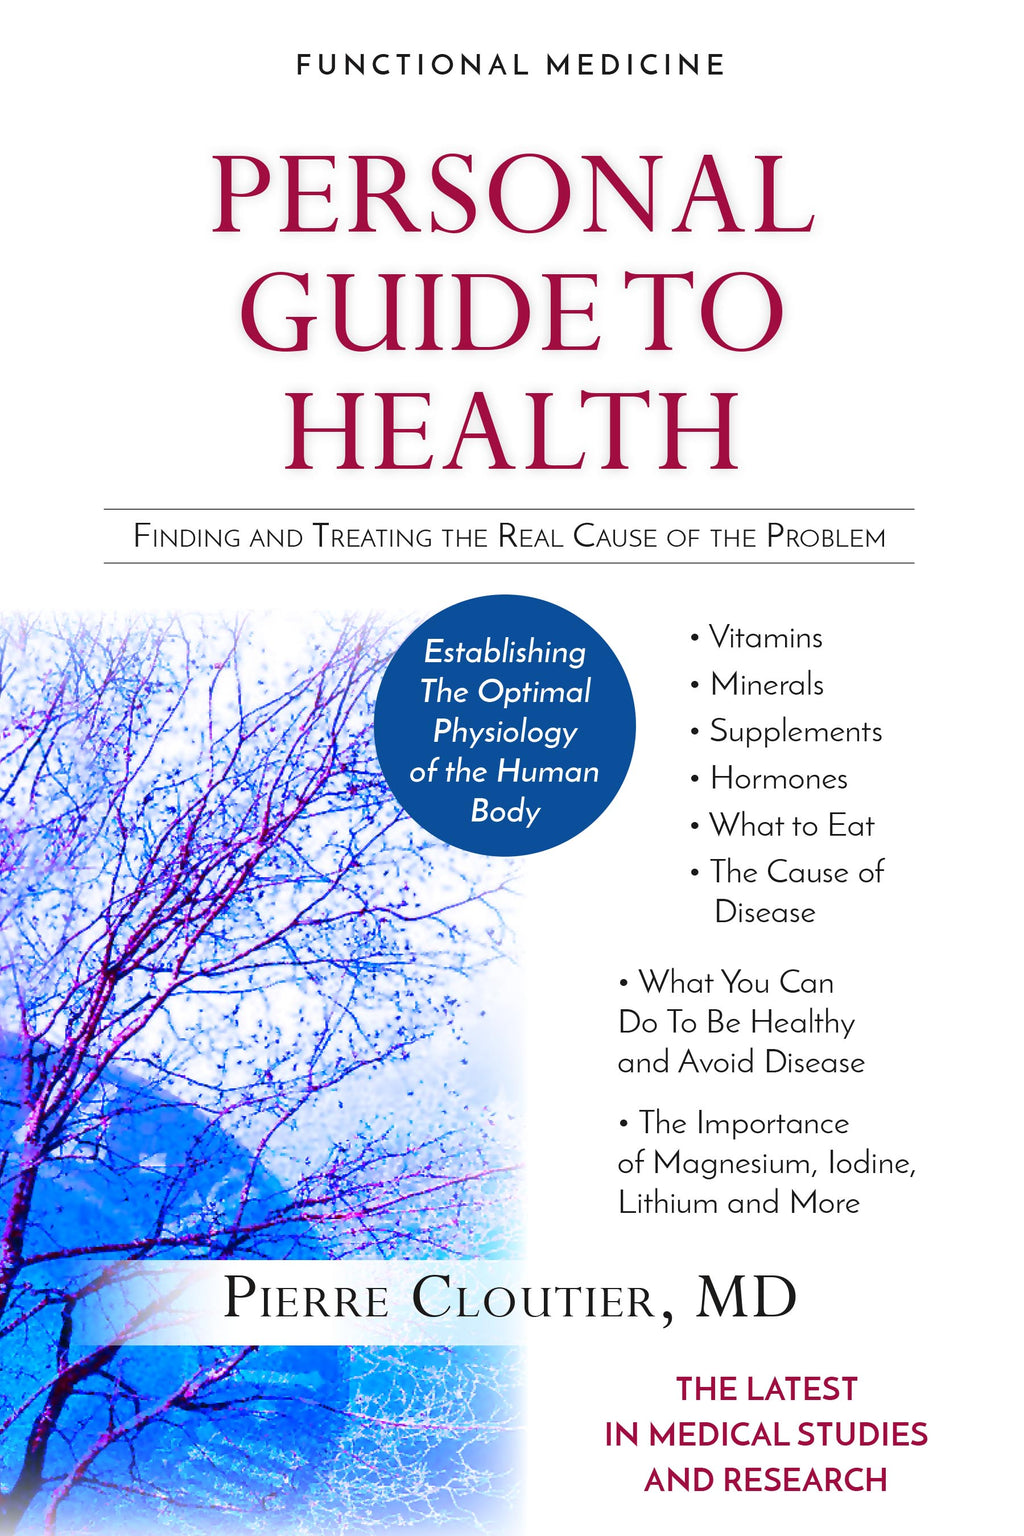 Personal Guide To Health - Blue Note Publications, Inc